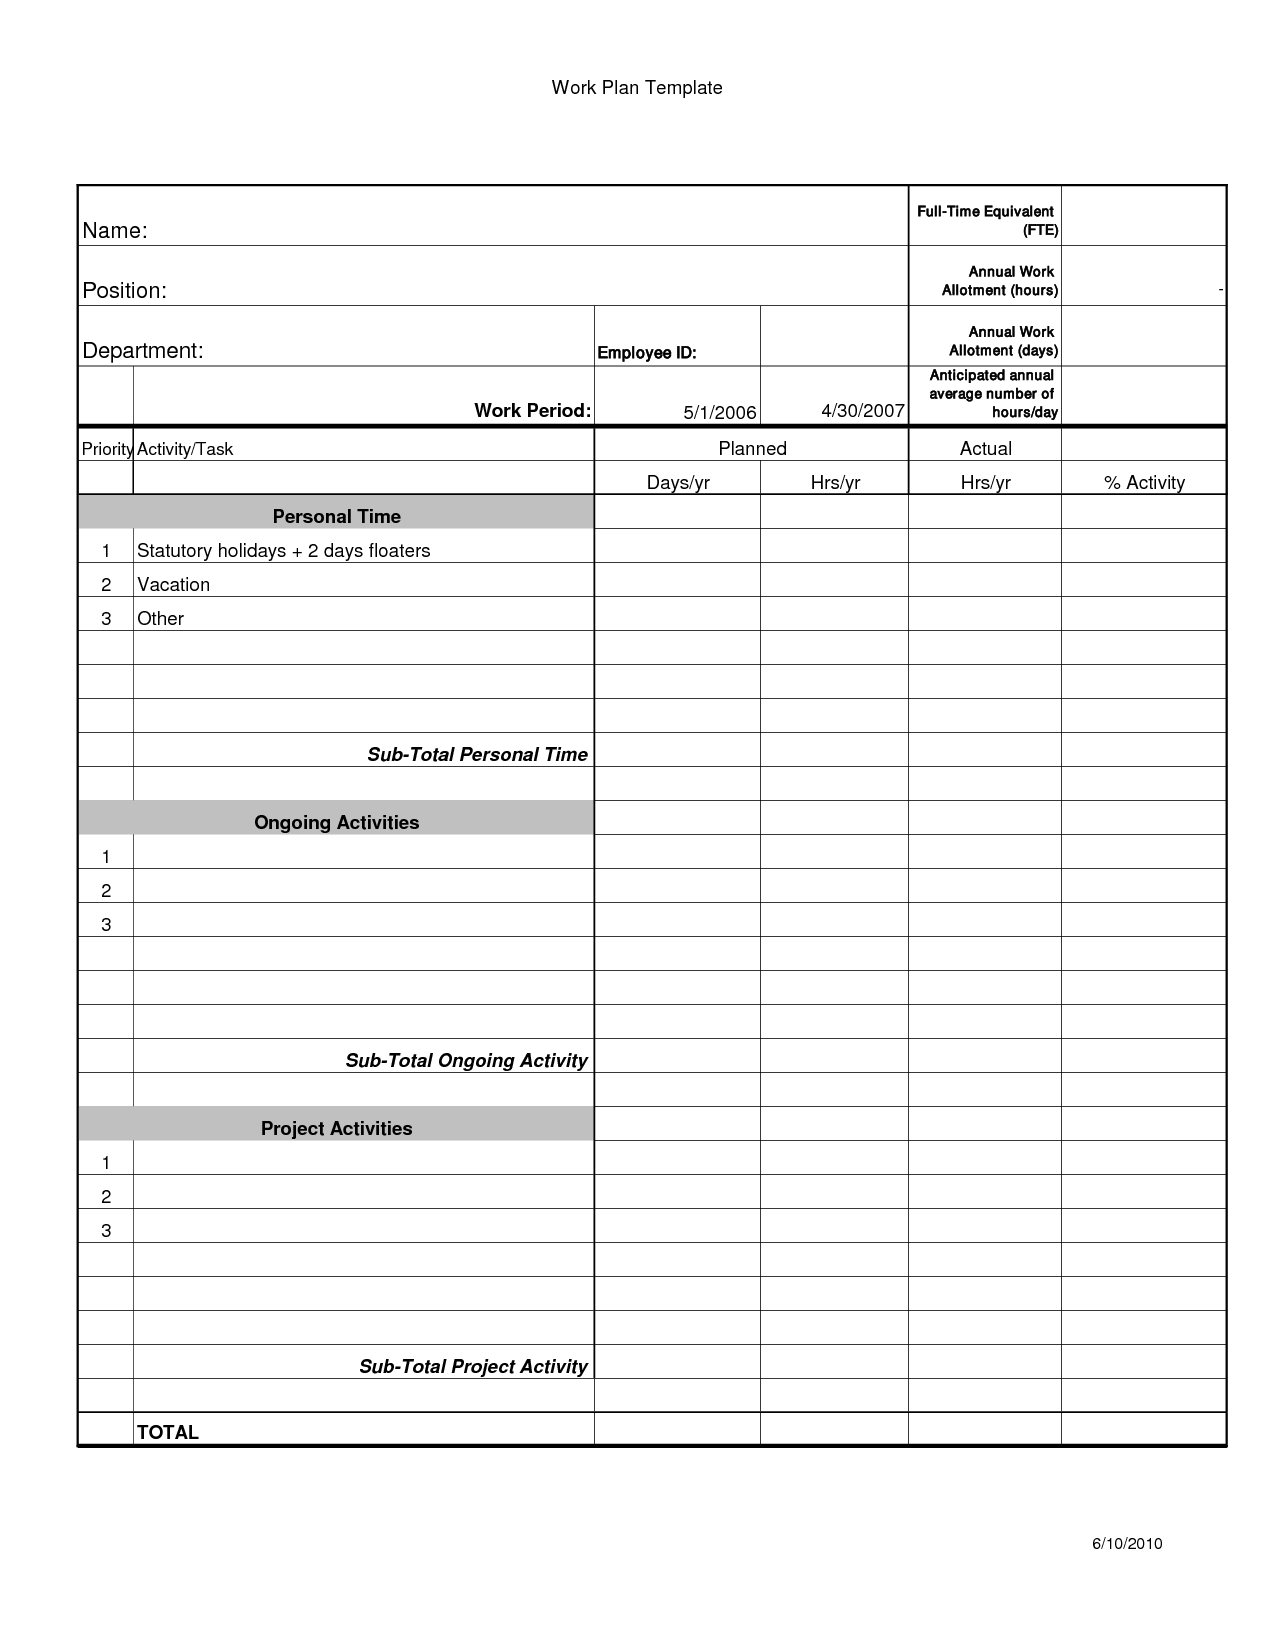 Employee Work Plan Template Word | How To Plan, Word Work For Work Plan Template Word